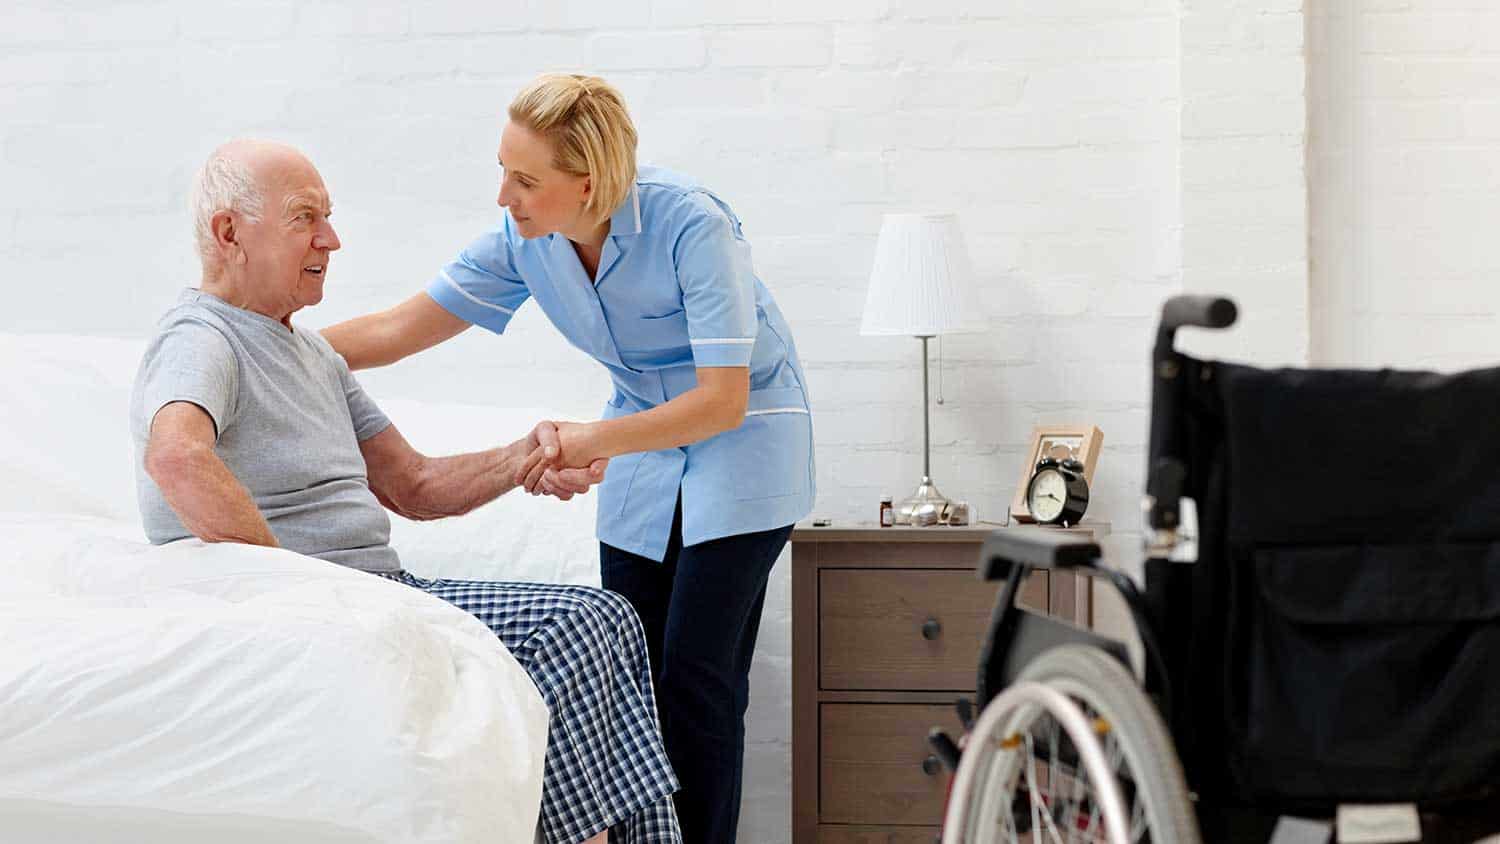 Nurse helping an older man from bed